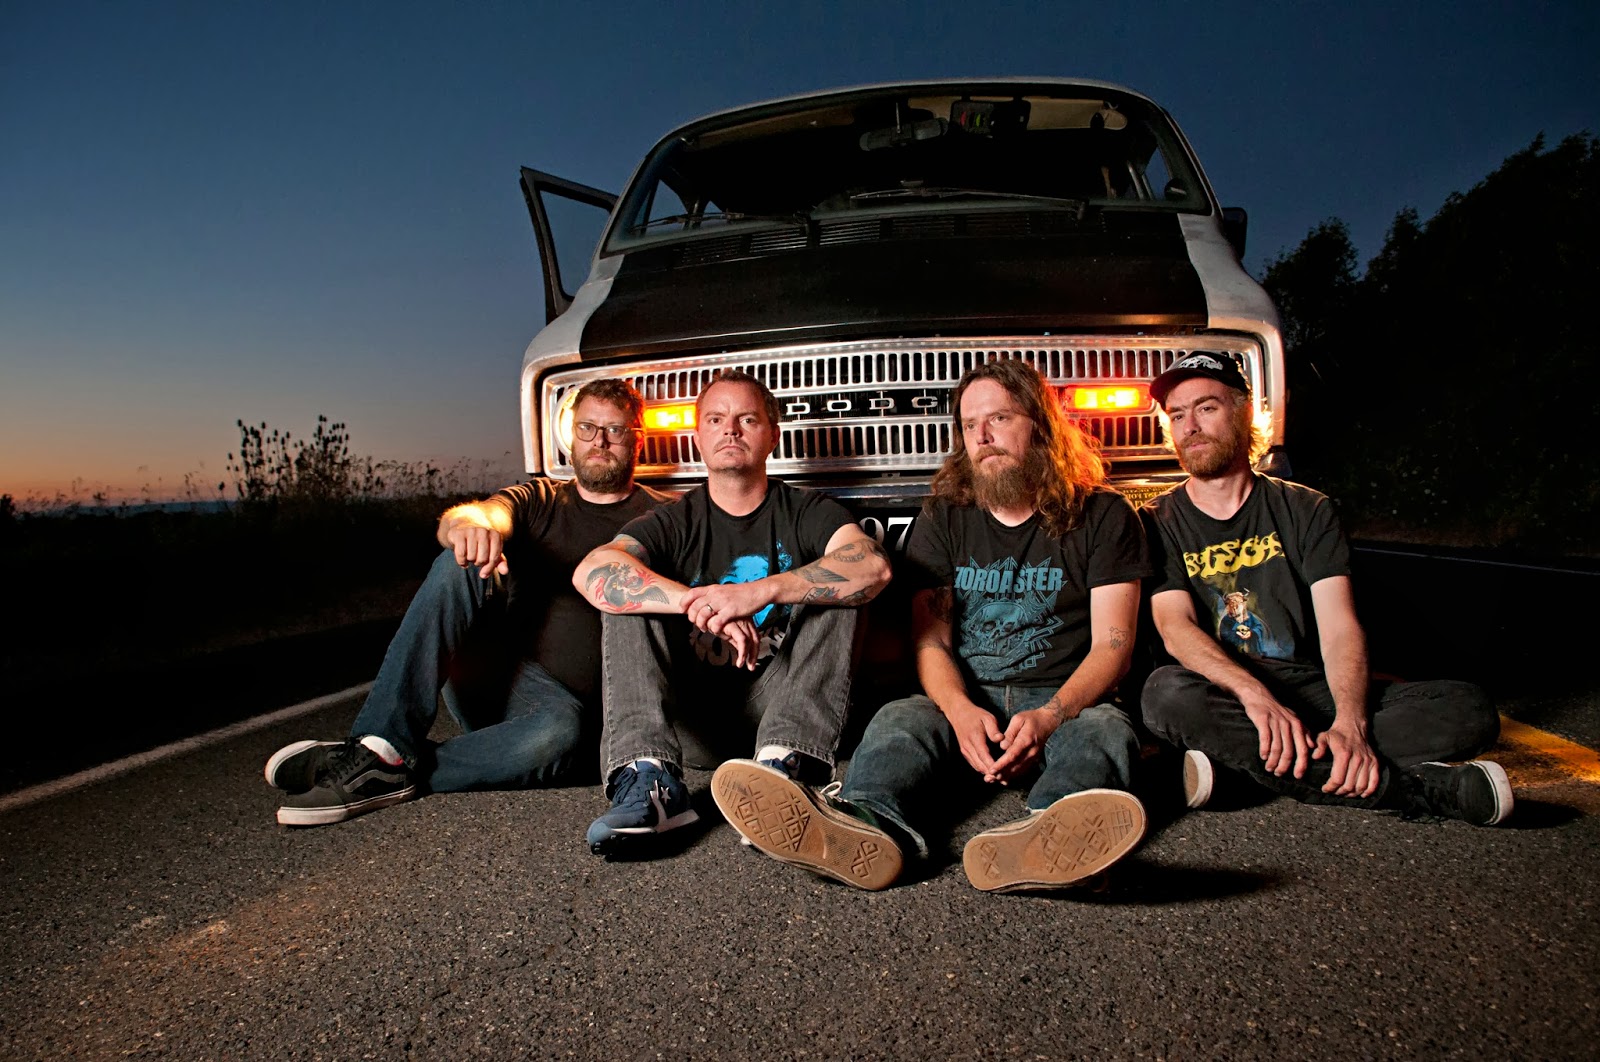 Red Fang "Whales and Leeches" press photos 2013